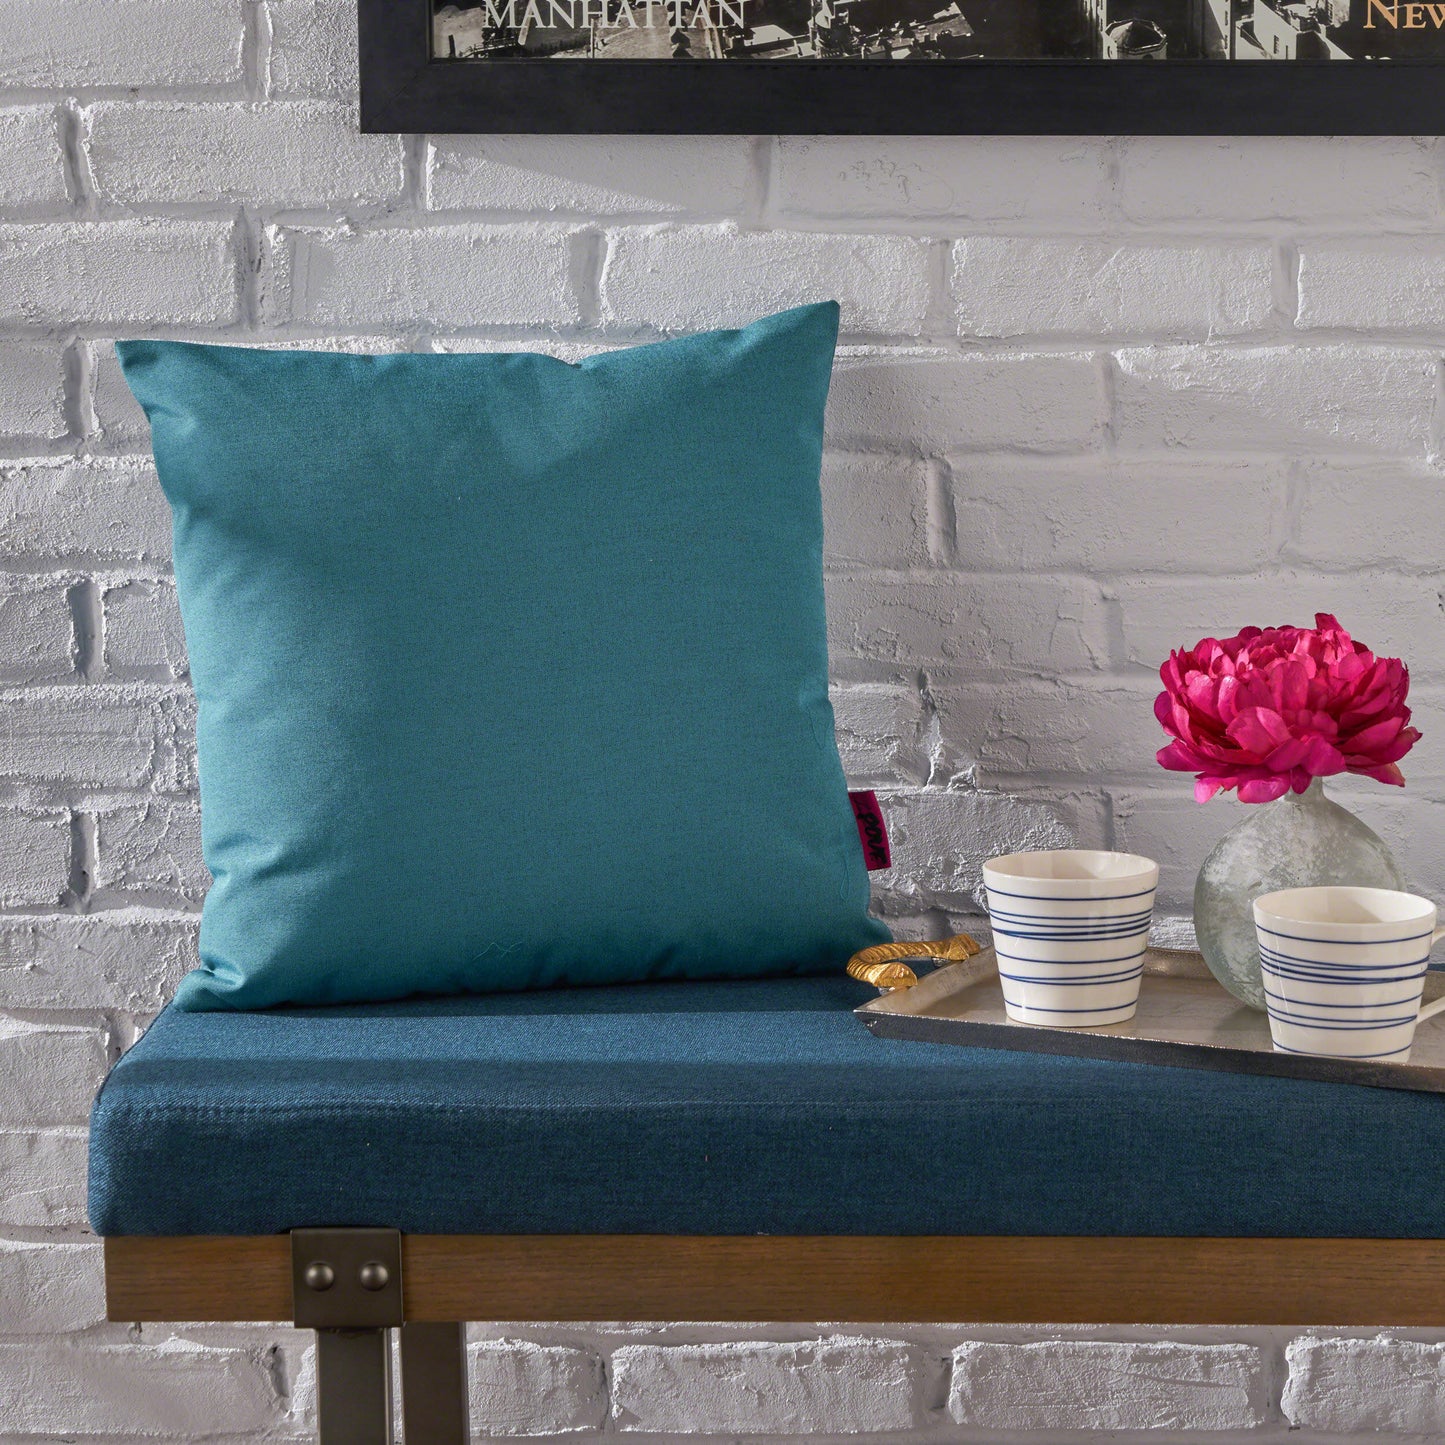 Misty Indoor Teal Water Resistant Small Square Throw Pillow